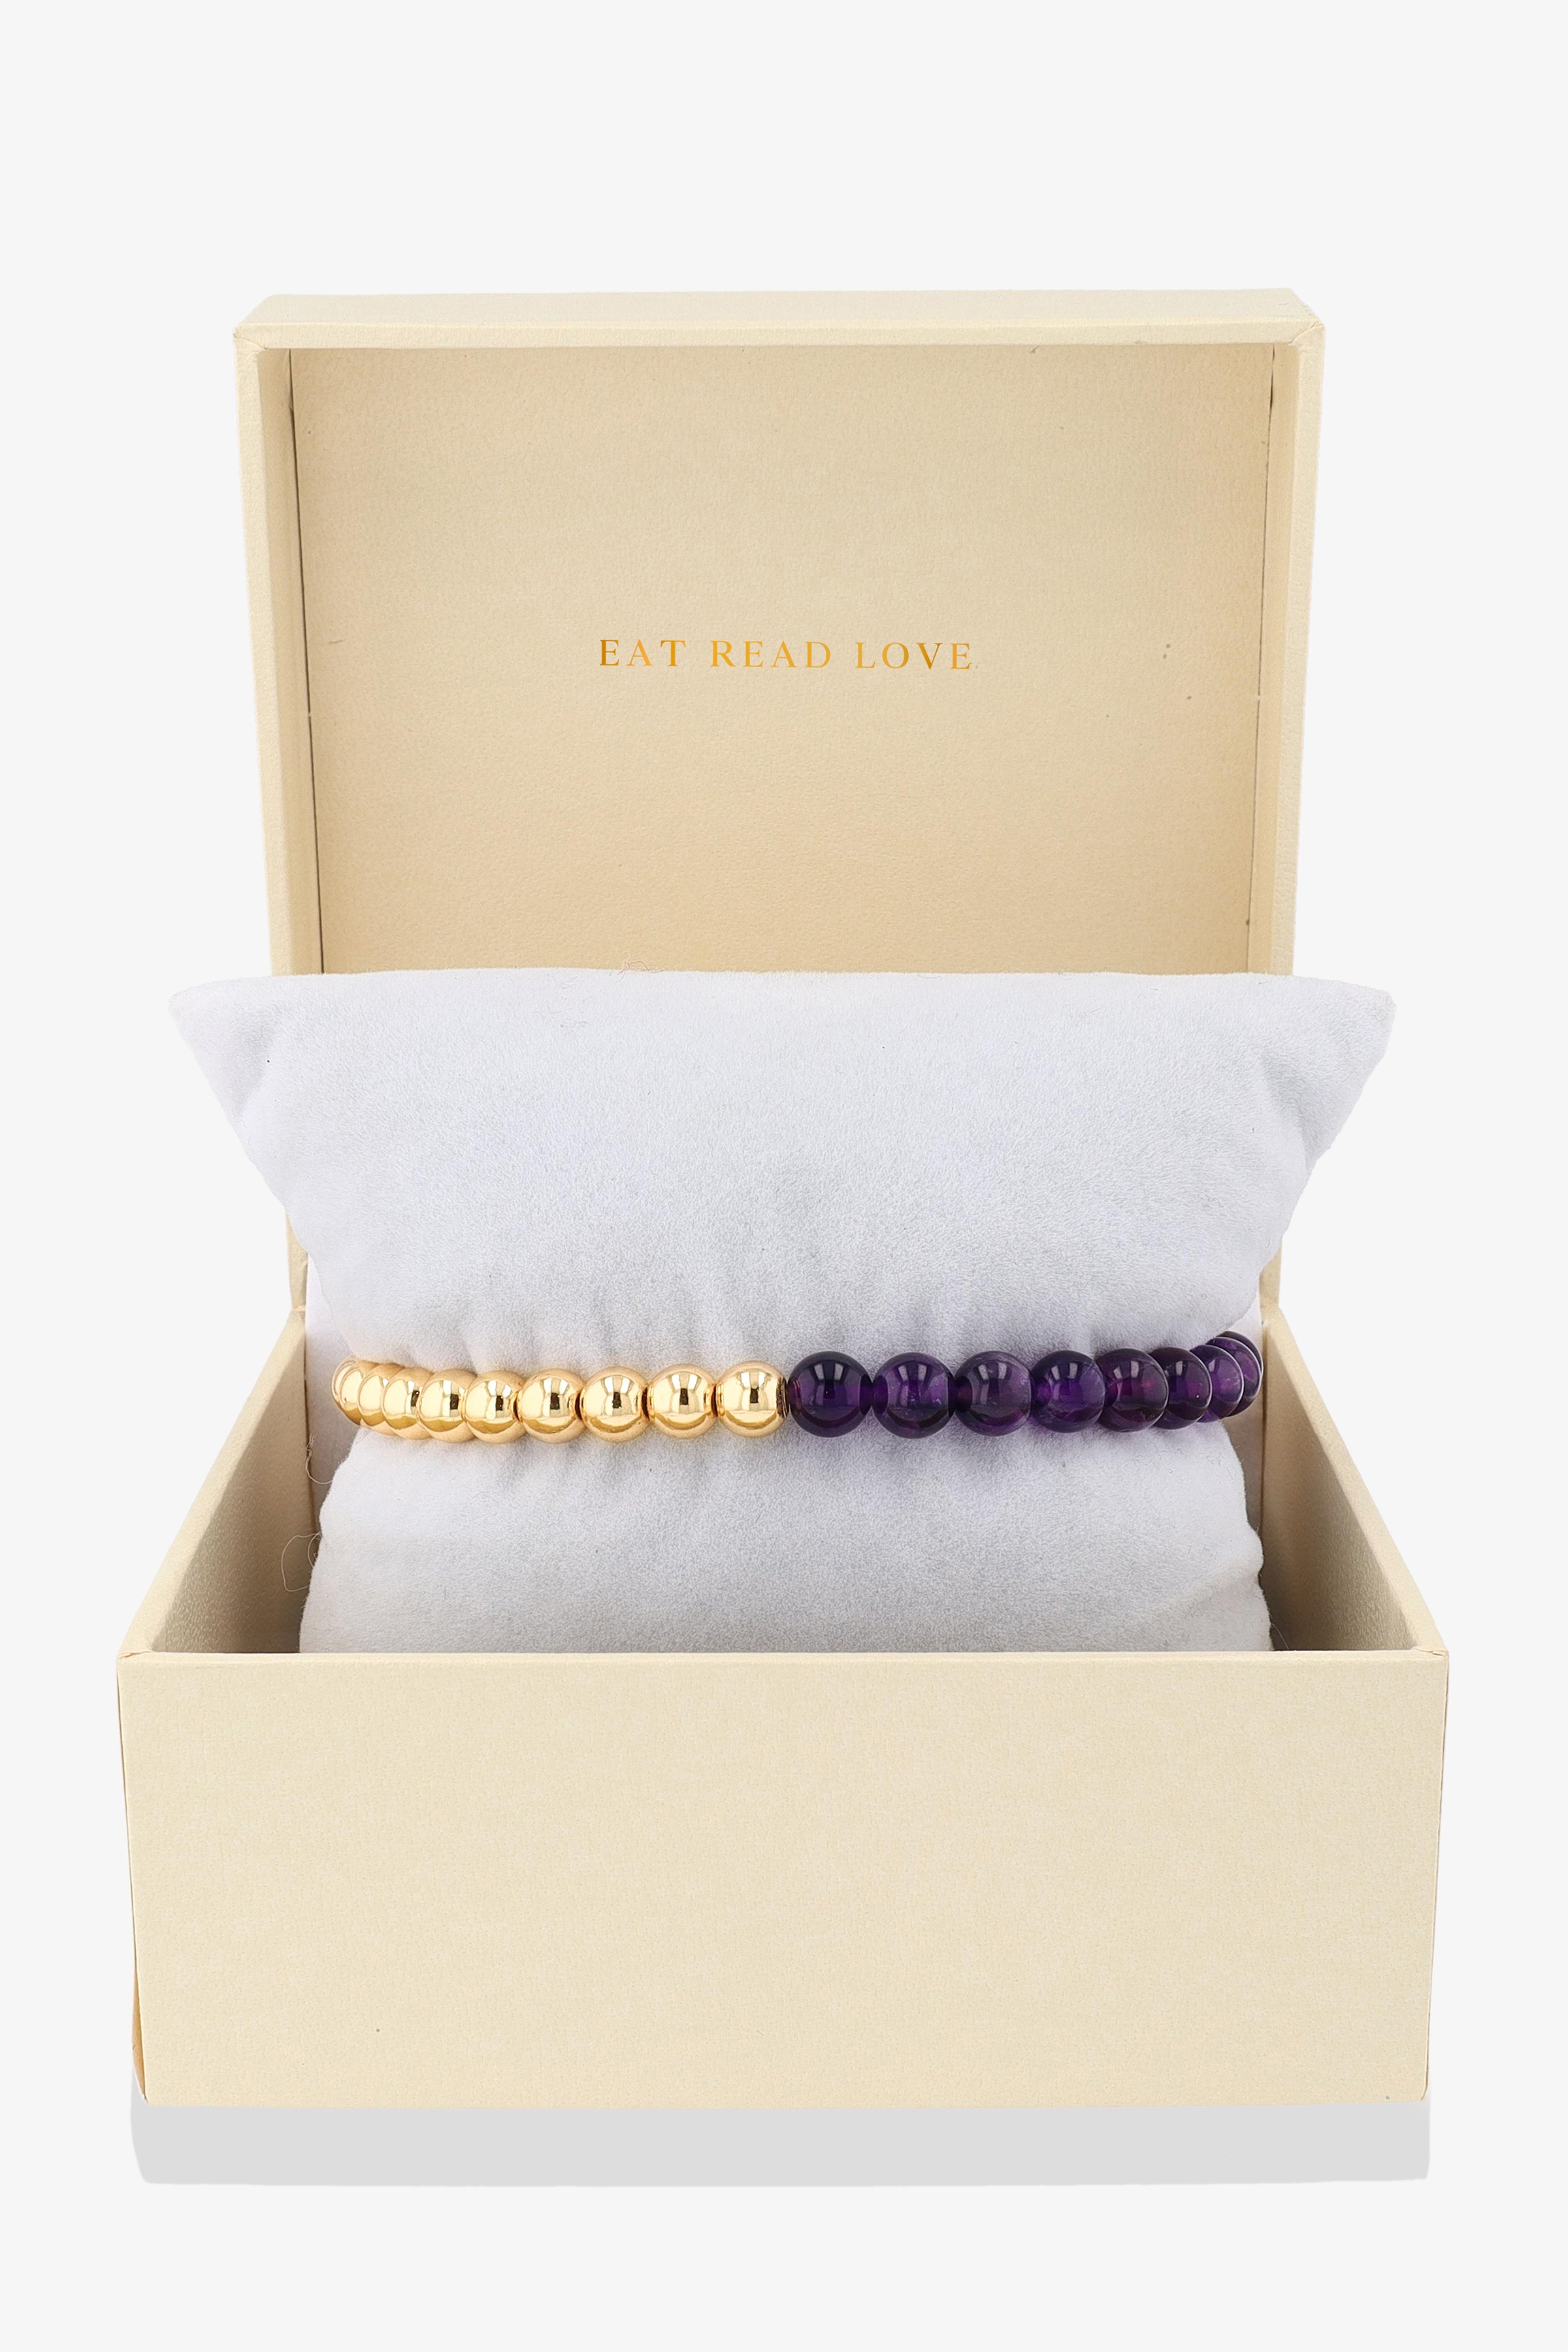 Queen of Health REAL Gold Bracelet With Amethyst